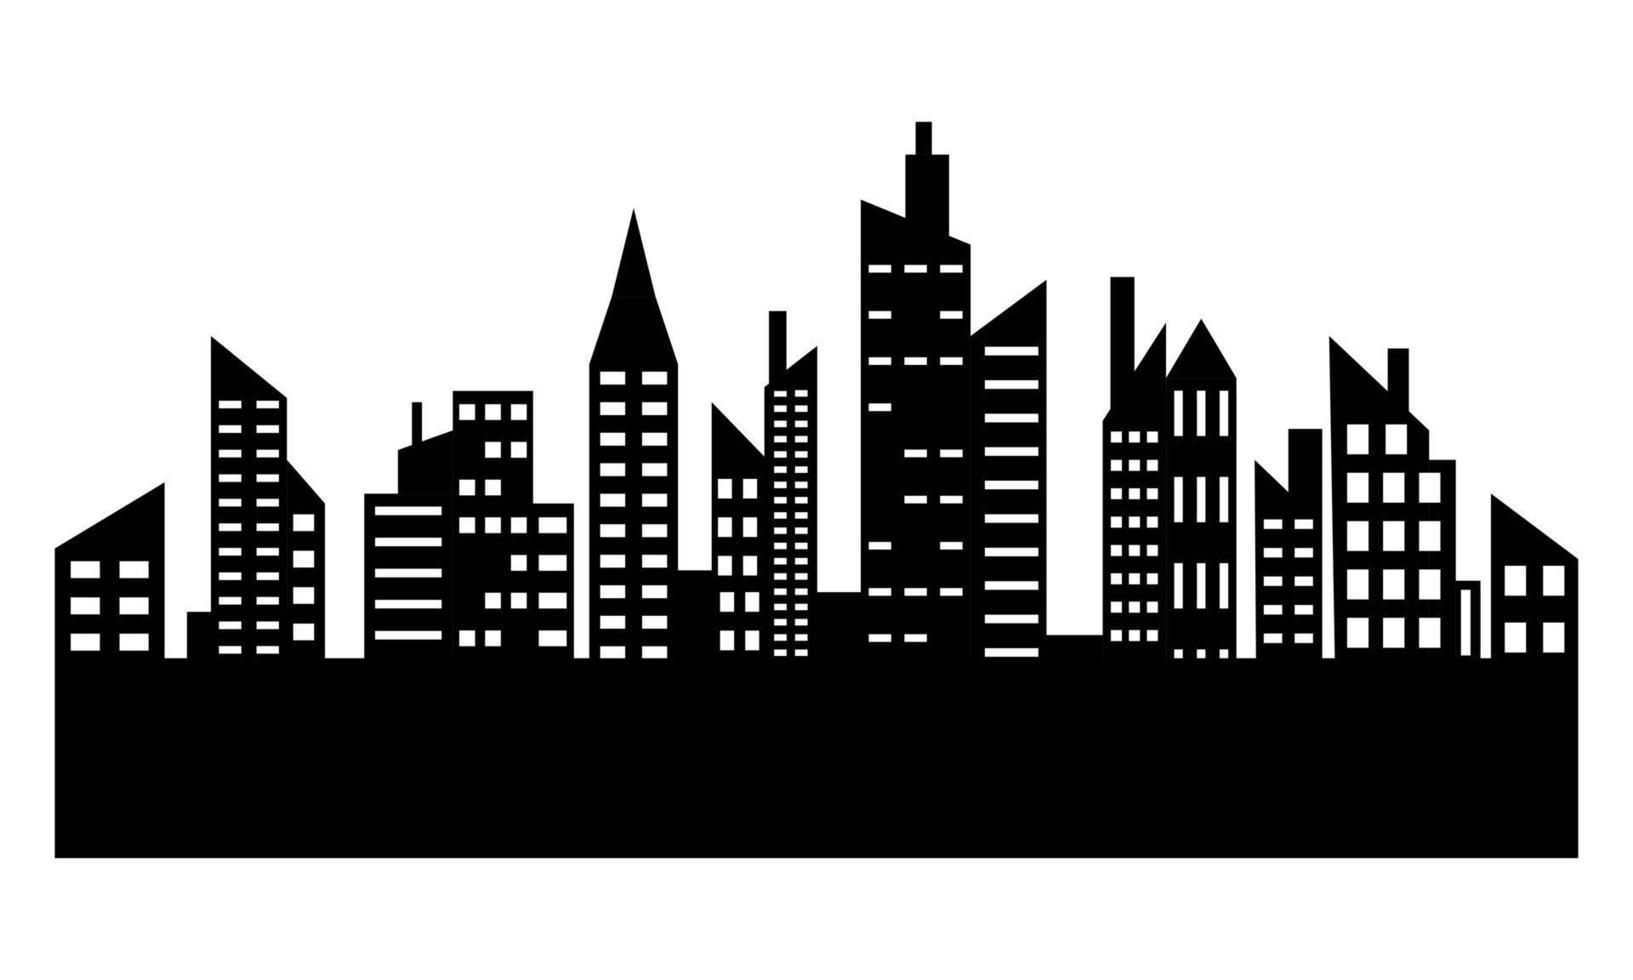 Silhouette of houses with windows in the city. Vector illustration.